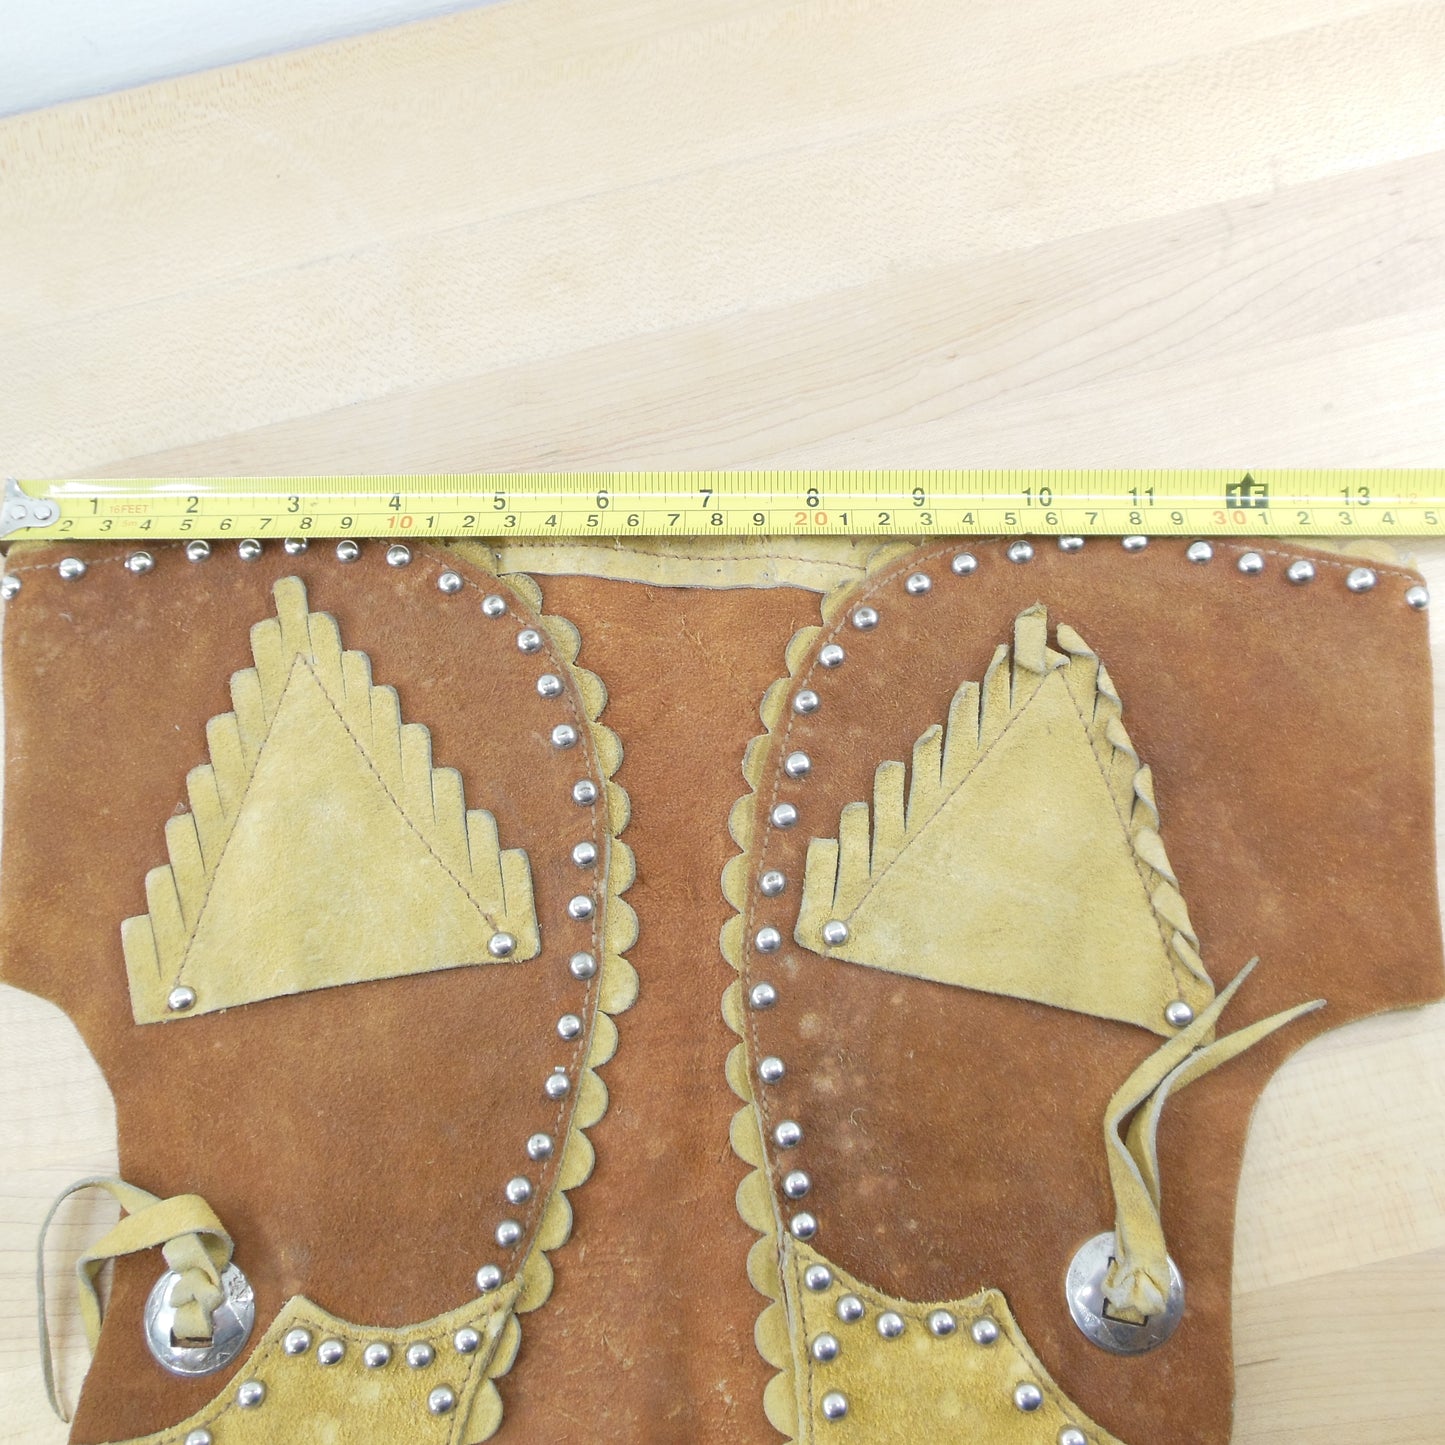 Schoellkopf Co. Dallas 1950's Leather Child Cowgirl Outfit Vest Skirt Waist